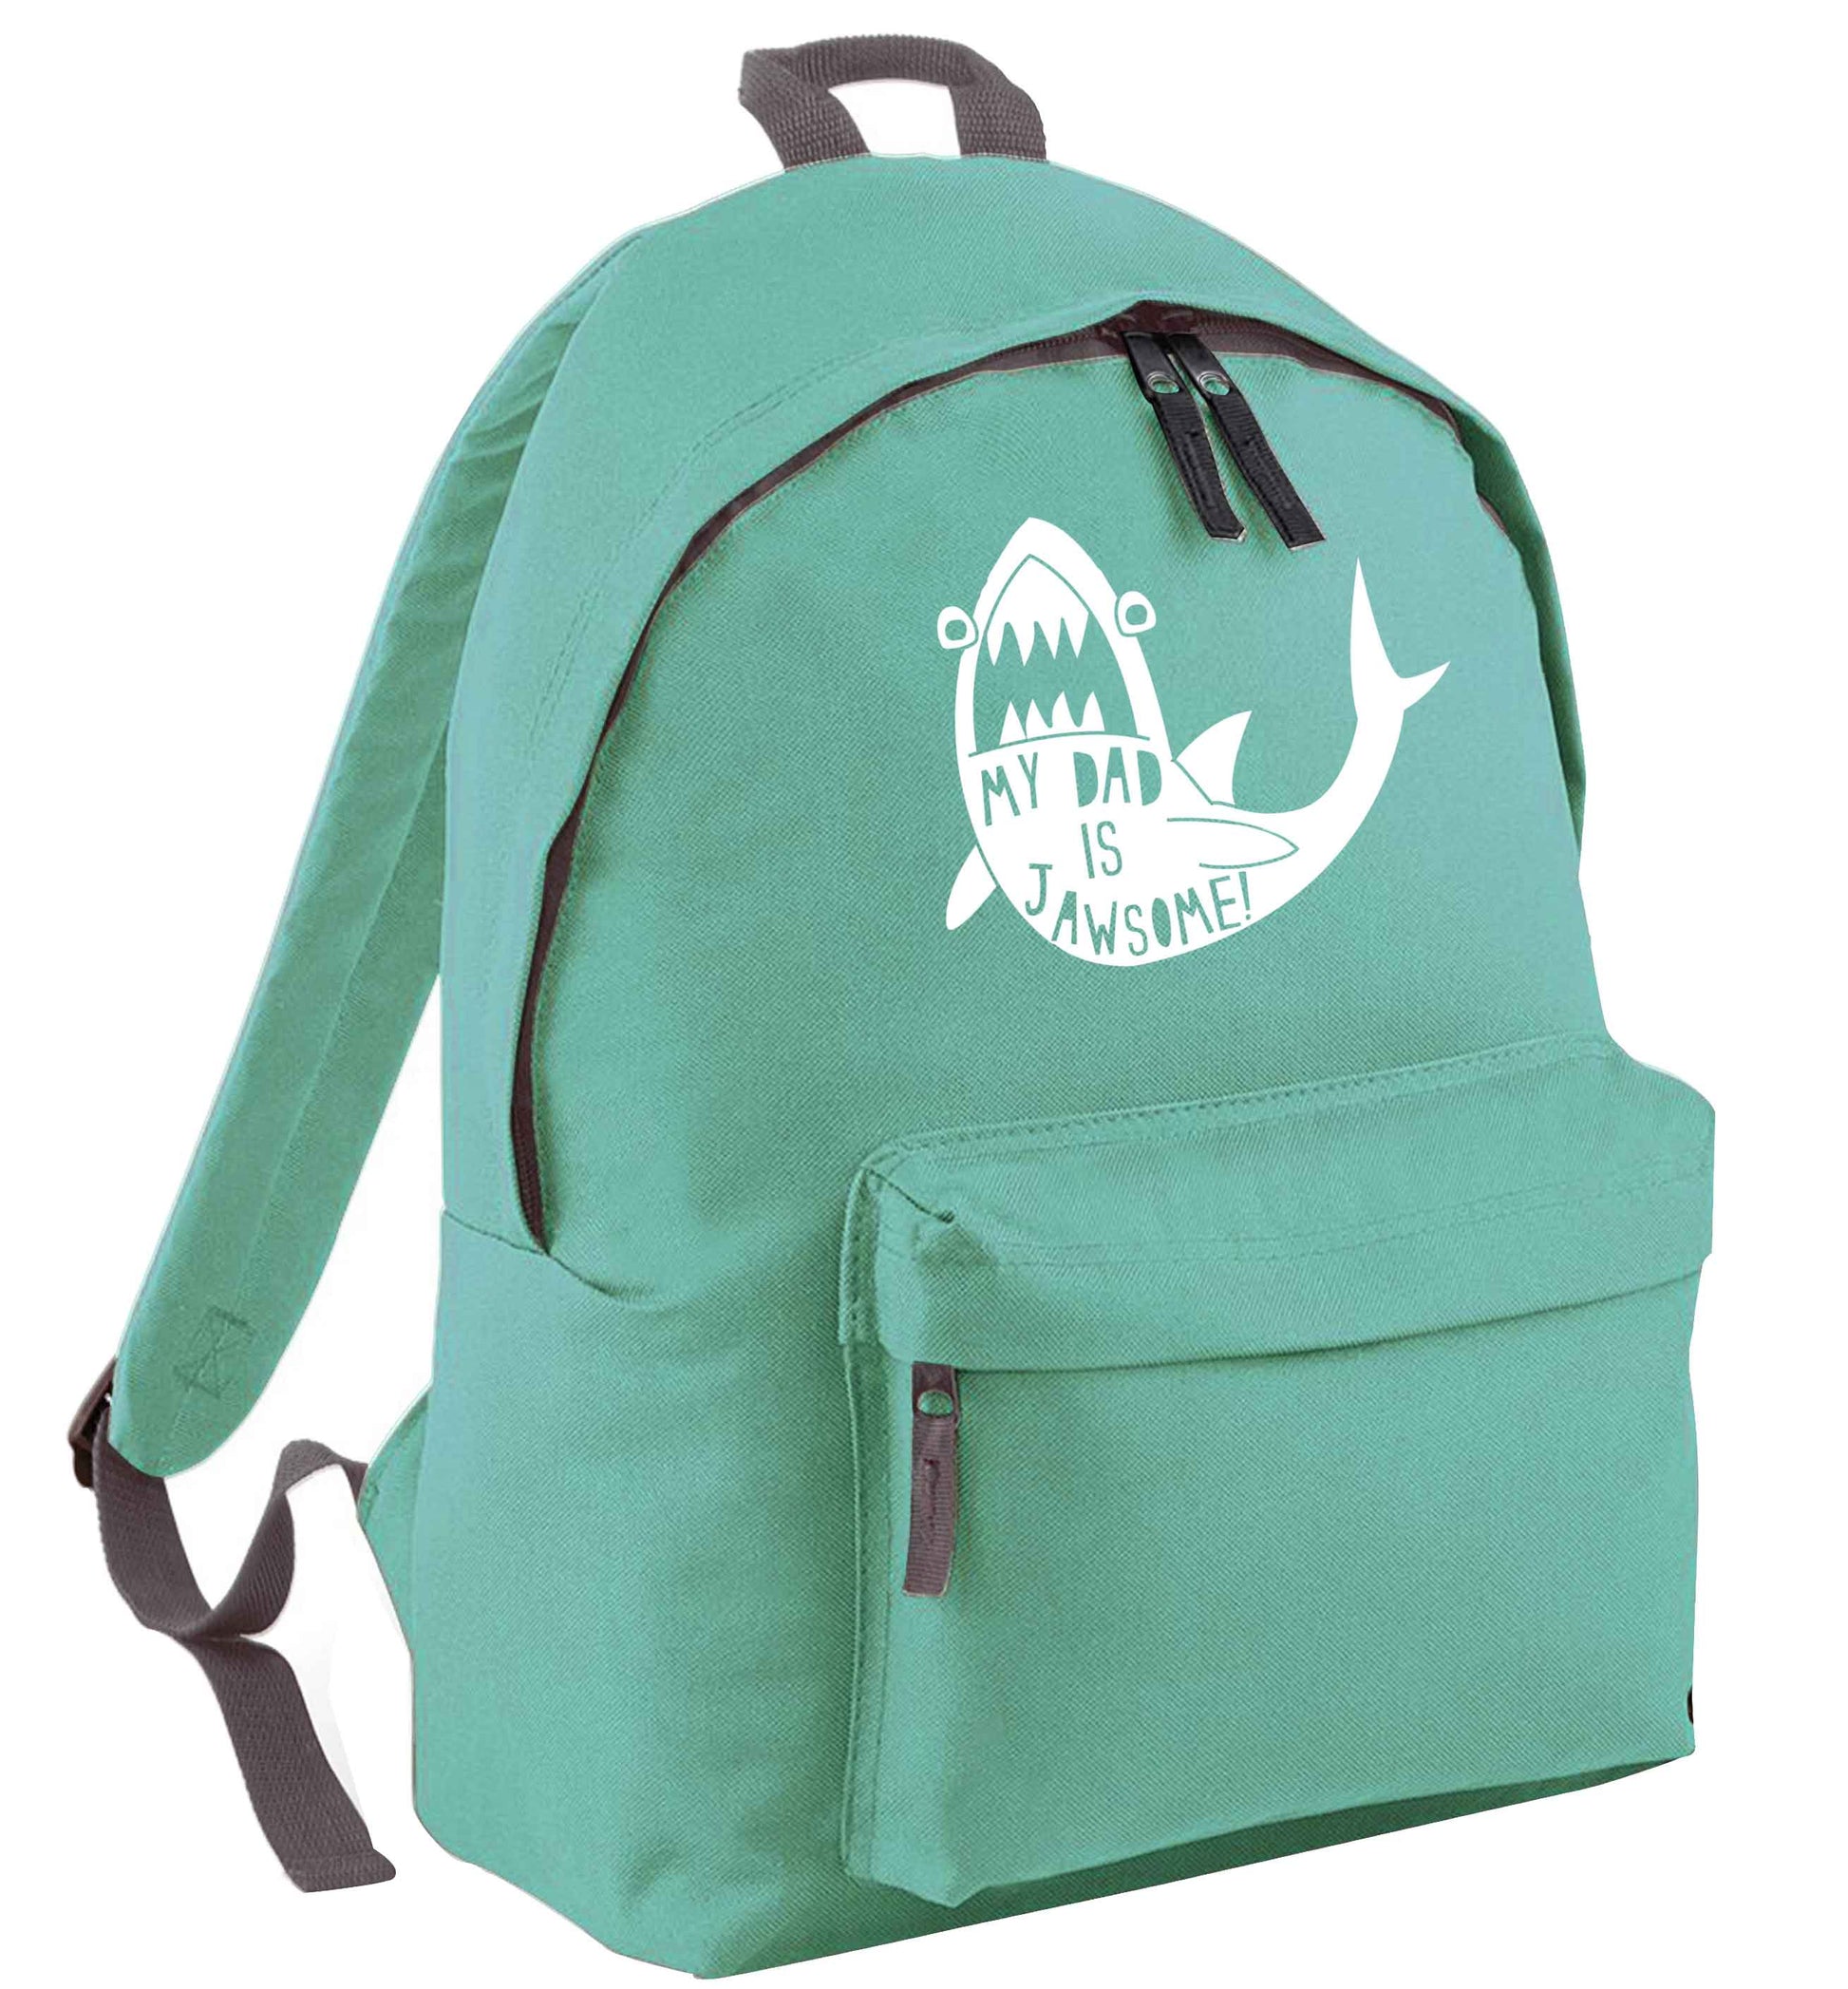 My Dad is jawsome mint adults backpack